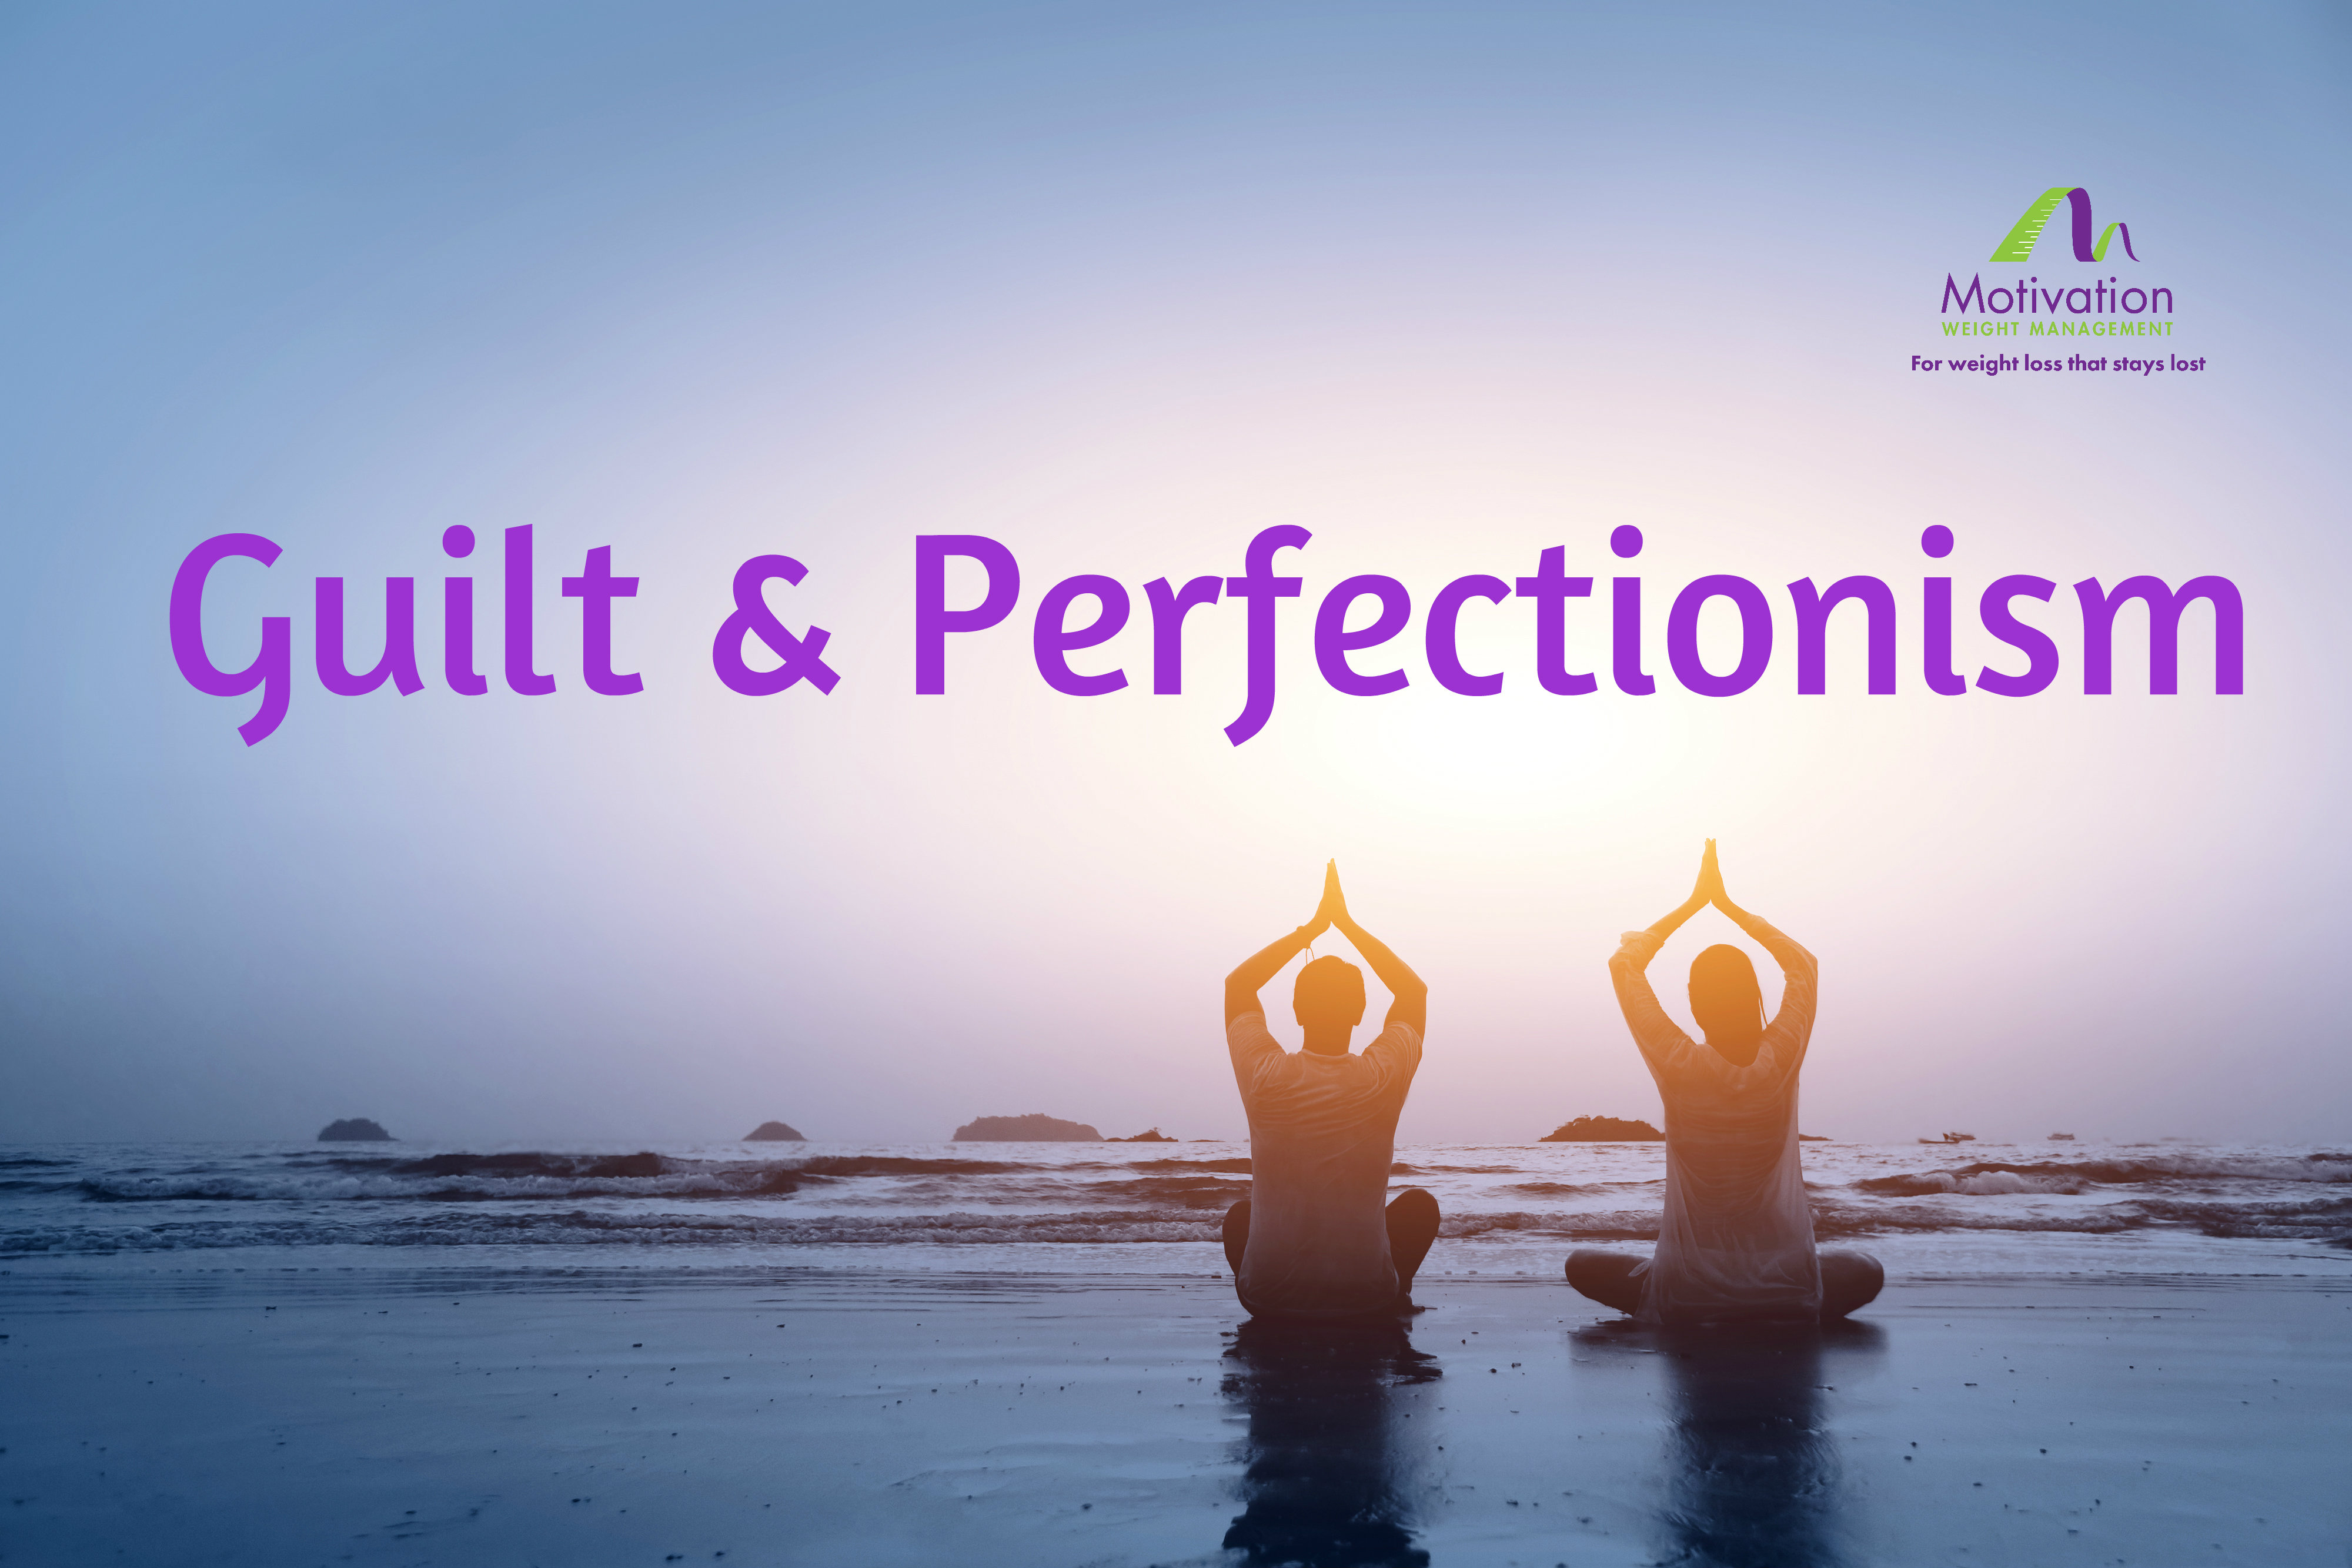 Day 7 Guilt & Perfectionism